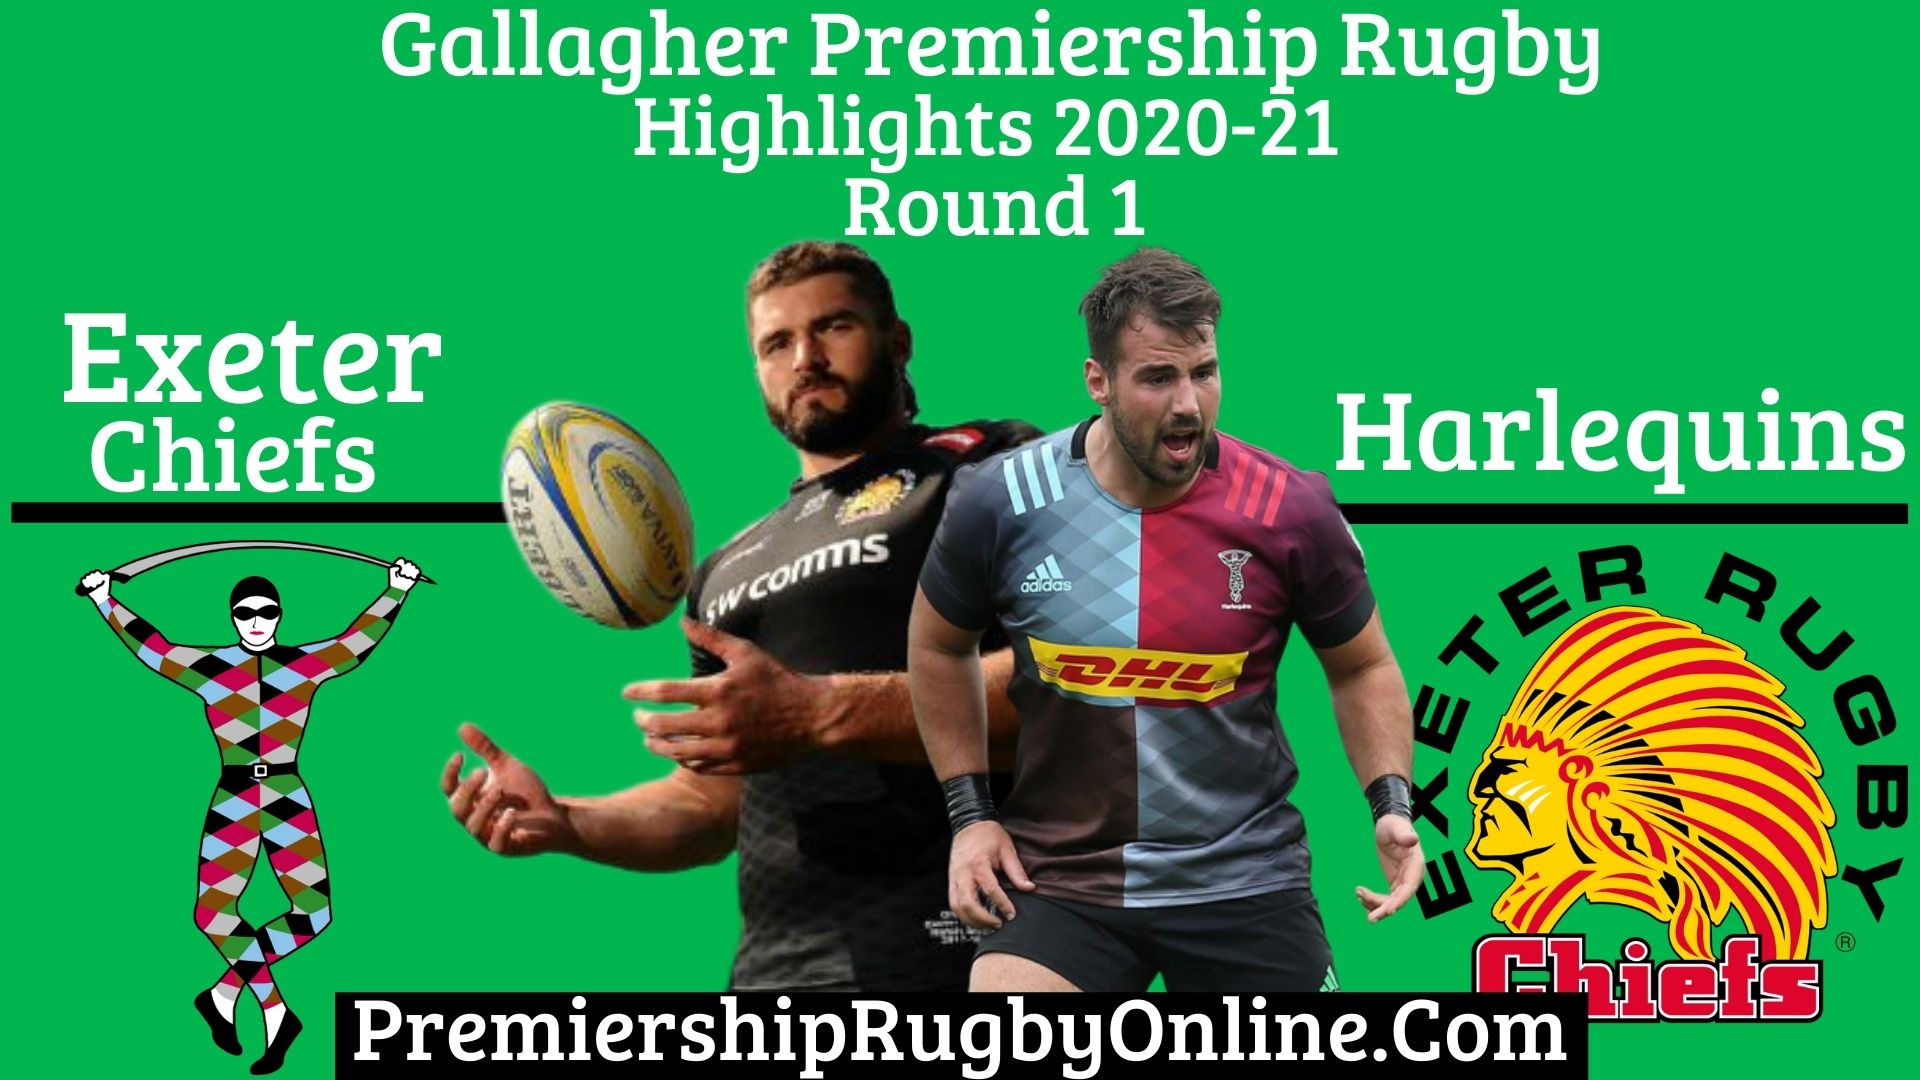 Harlequins Vs Exeter Chiefs Highlights 2020 RD 1